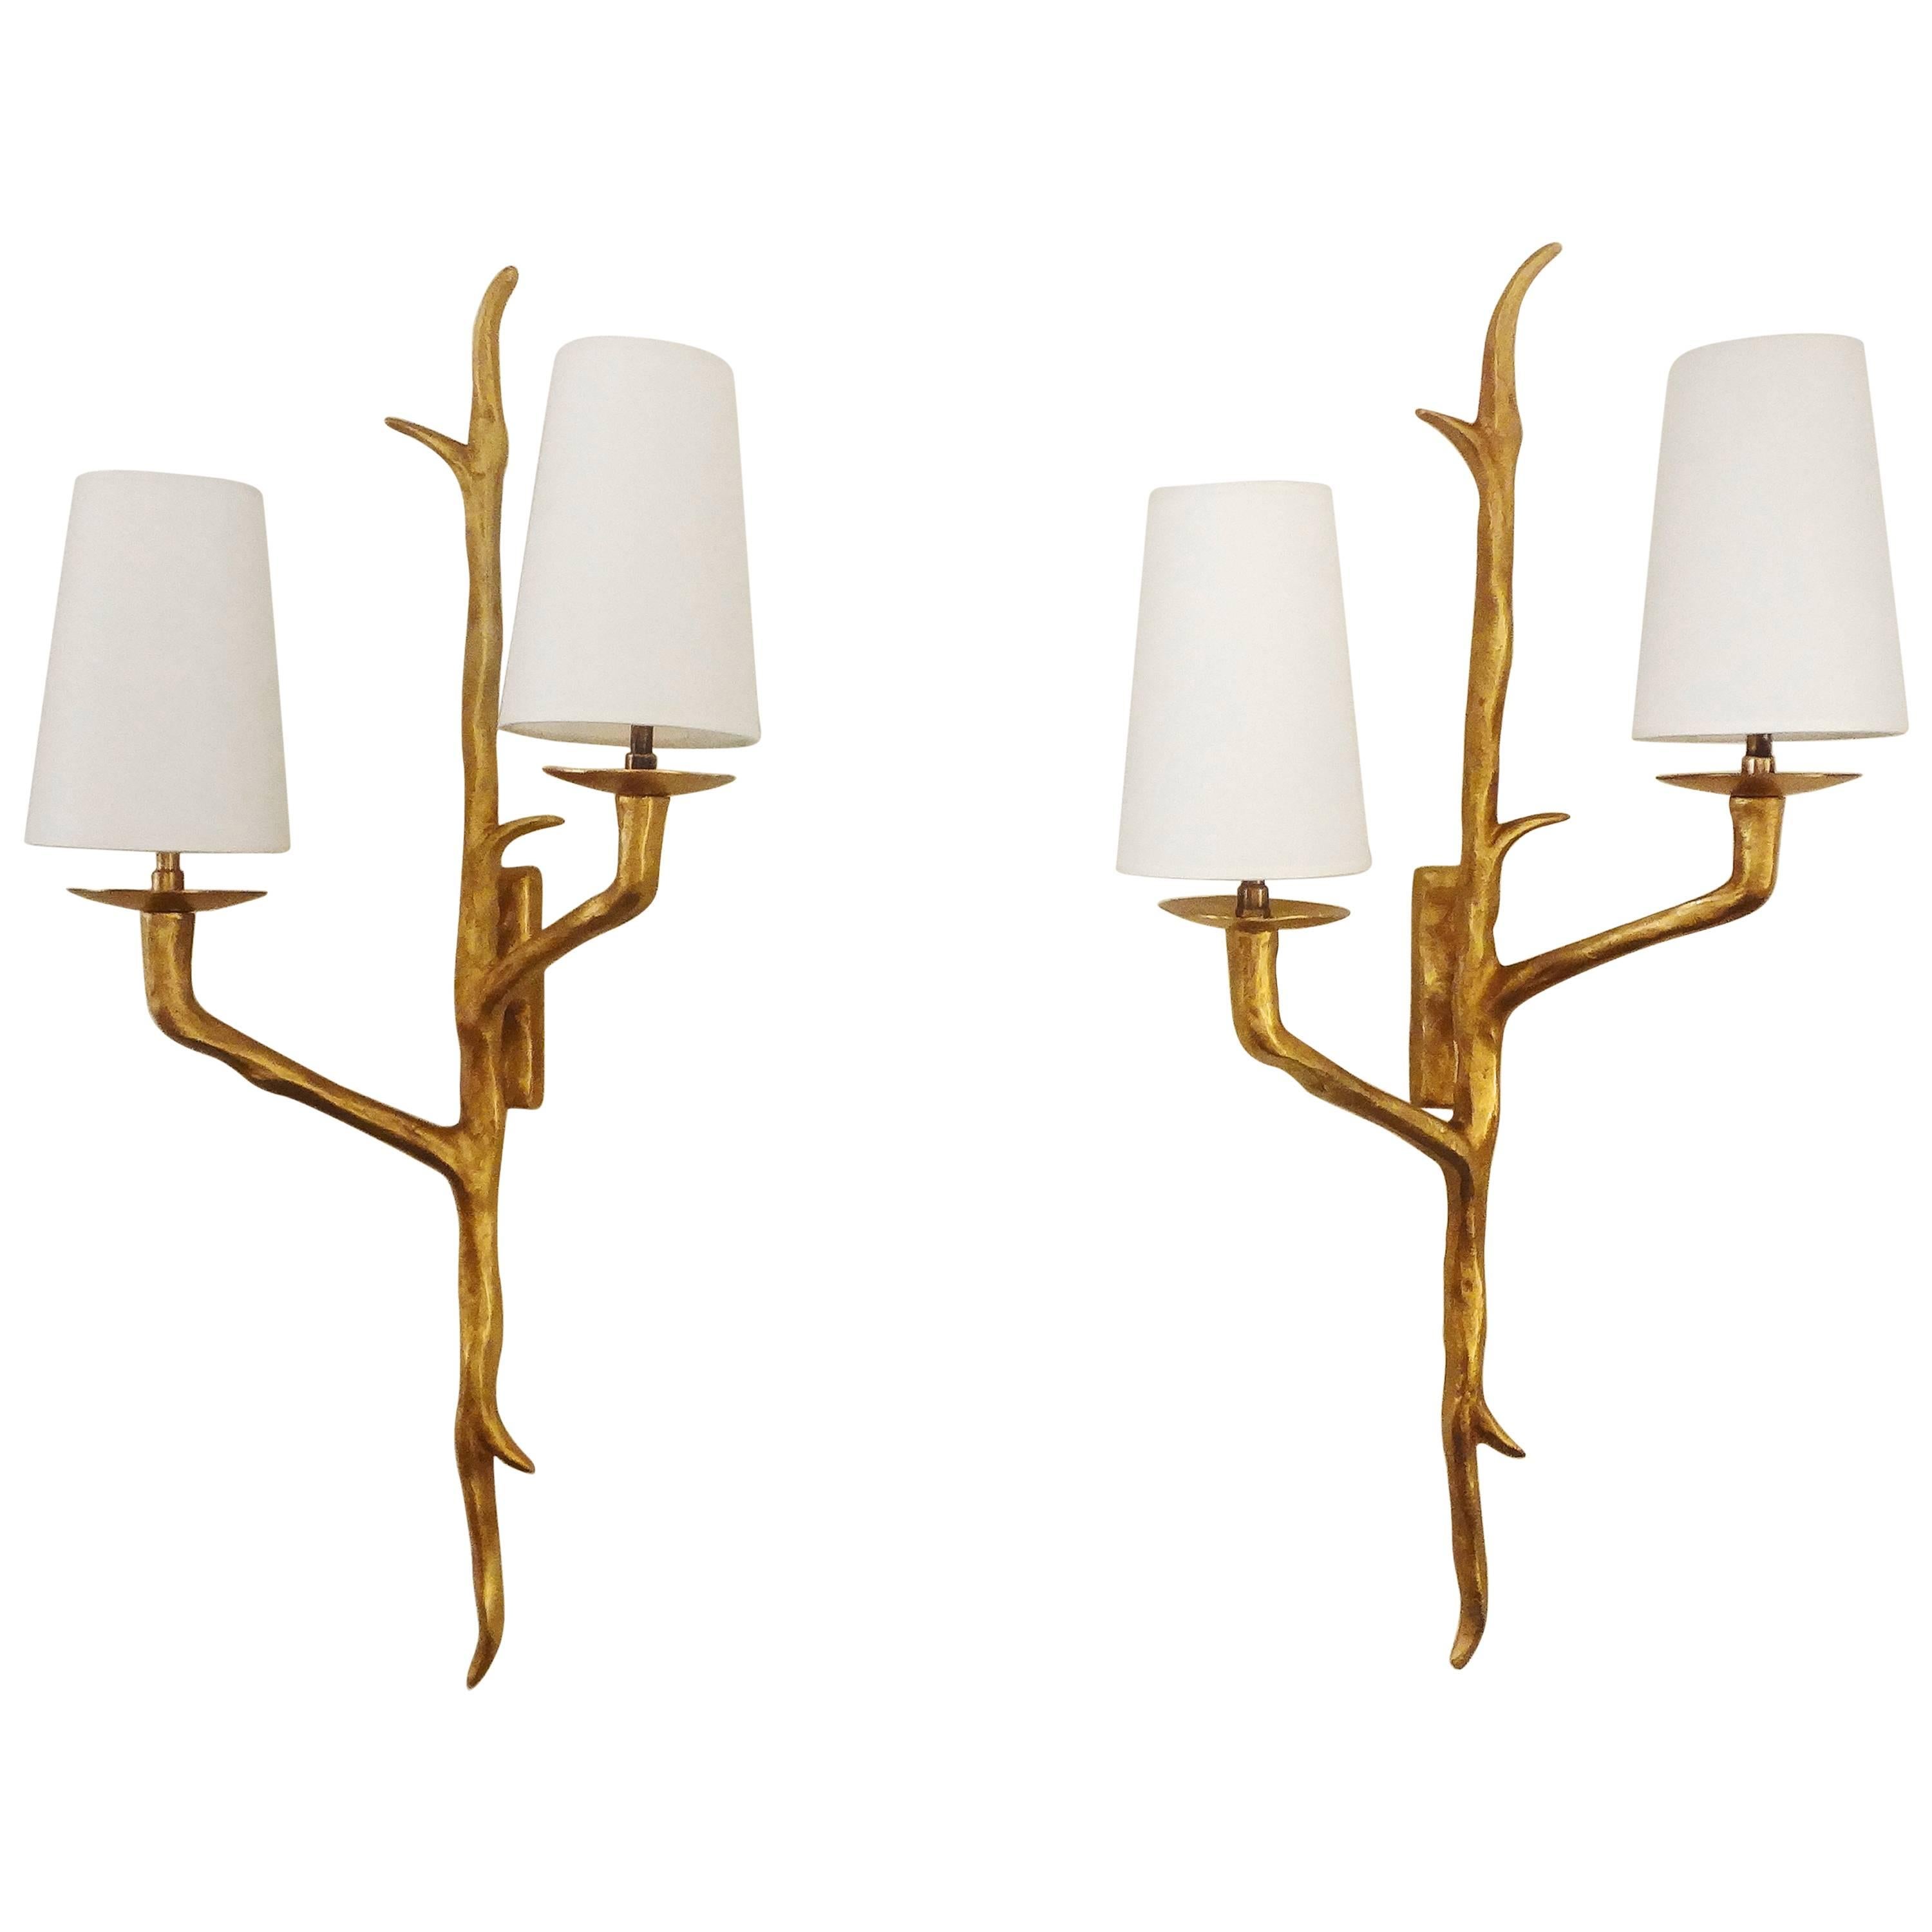 Pair of Bronze Wall Sconces by Maison Arlus, France, 1950s